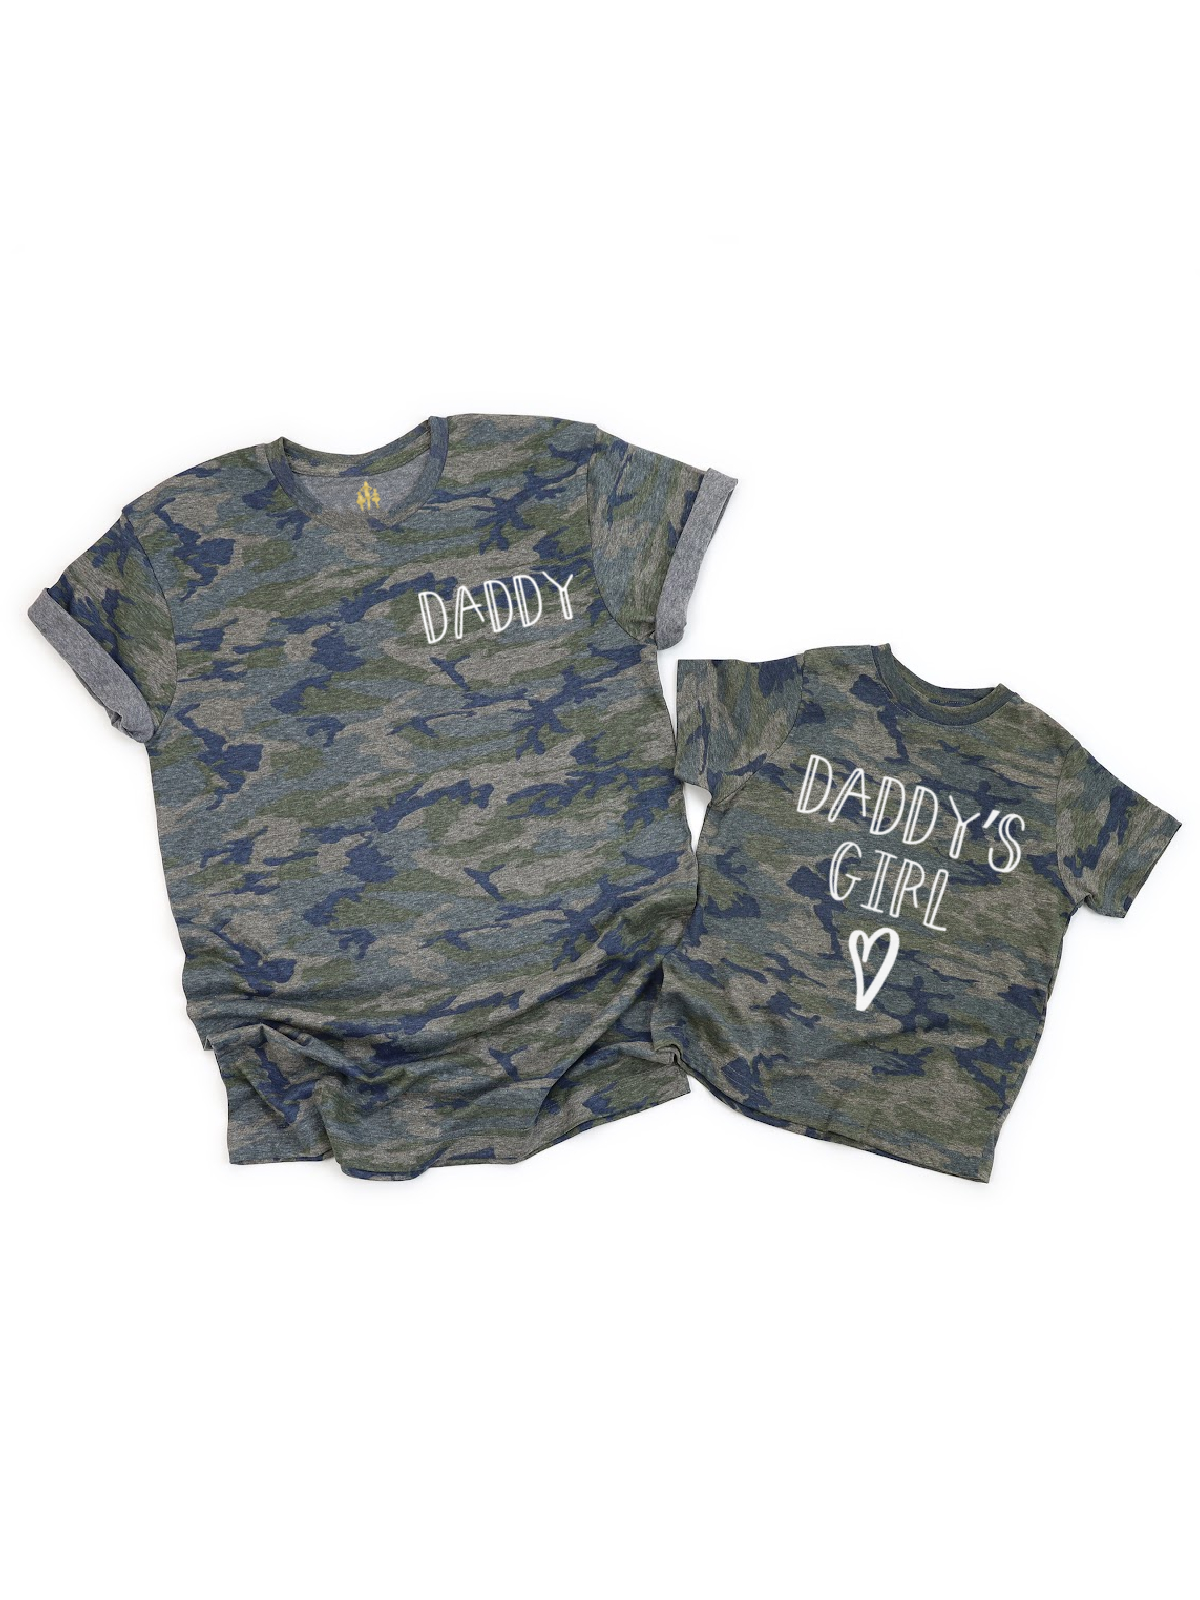 Daddy and Daddy's Girl Vintage Camo Matching Shirts